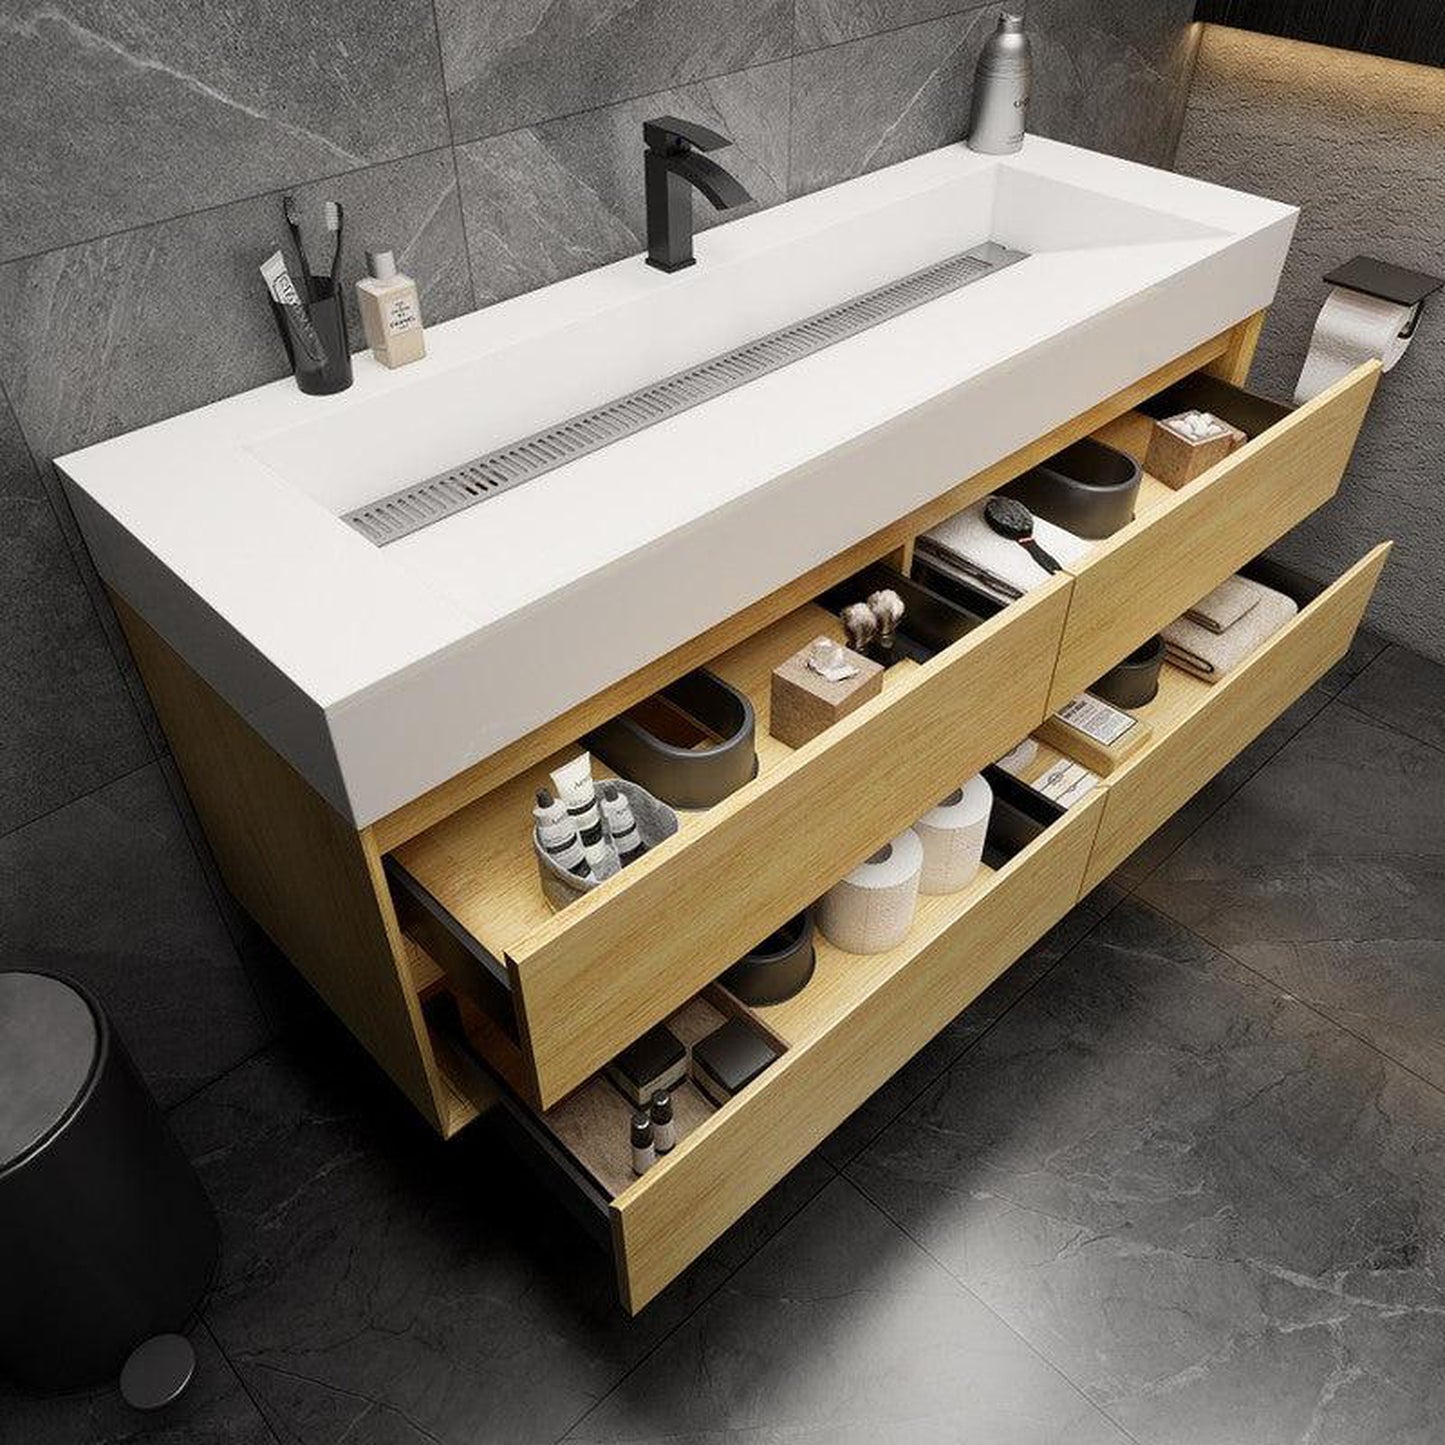 Moreno Bath MAX 60" Teak Oak Wall-Mounted Vanity With Single Faucet Hole and Reinforced White Acrylic Sink